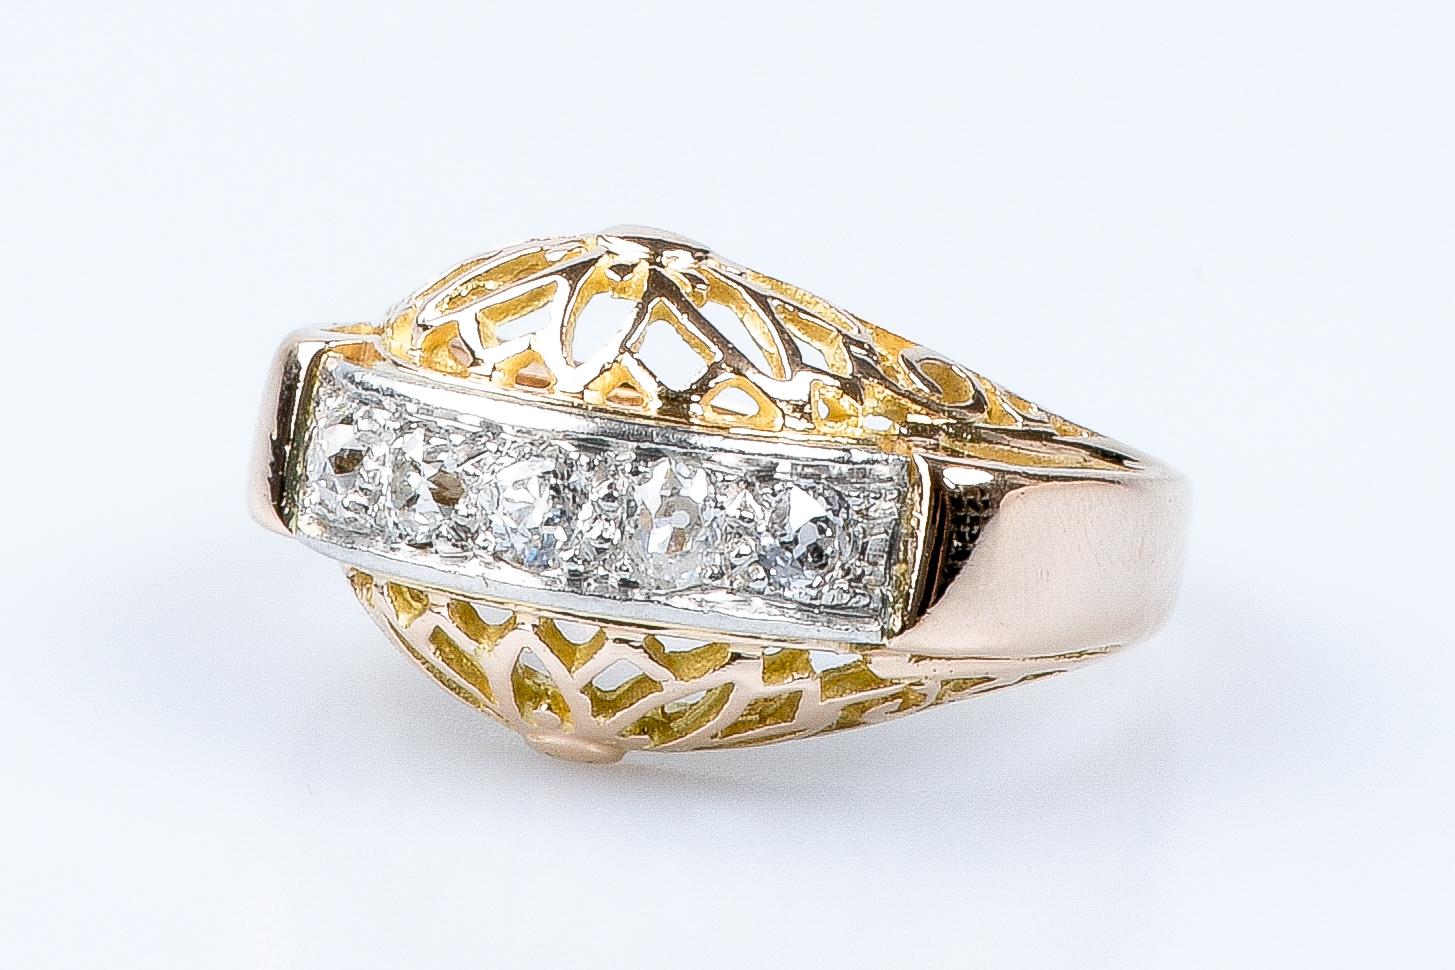 For Sale:  18 carat yellow and white gold ring designed with 5 round brillant cut diamonds 12